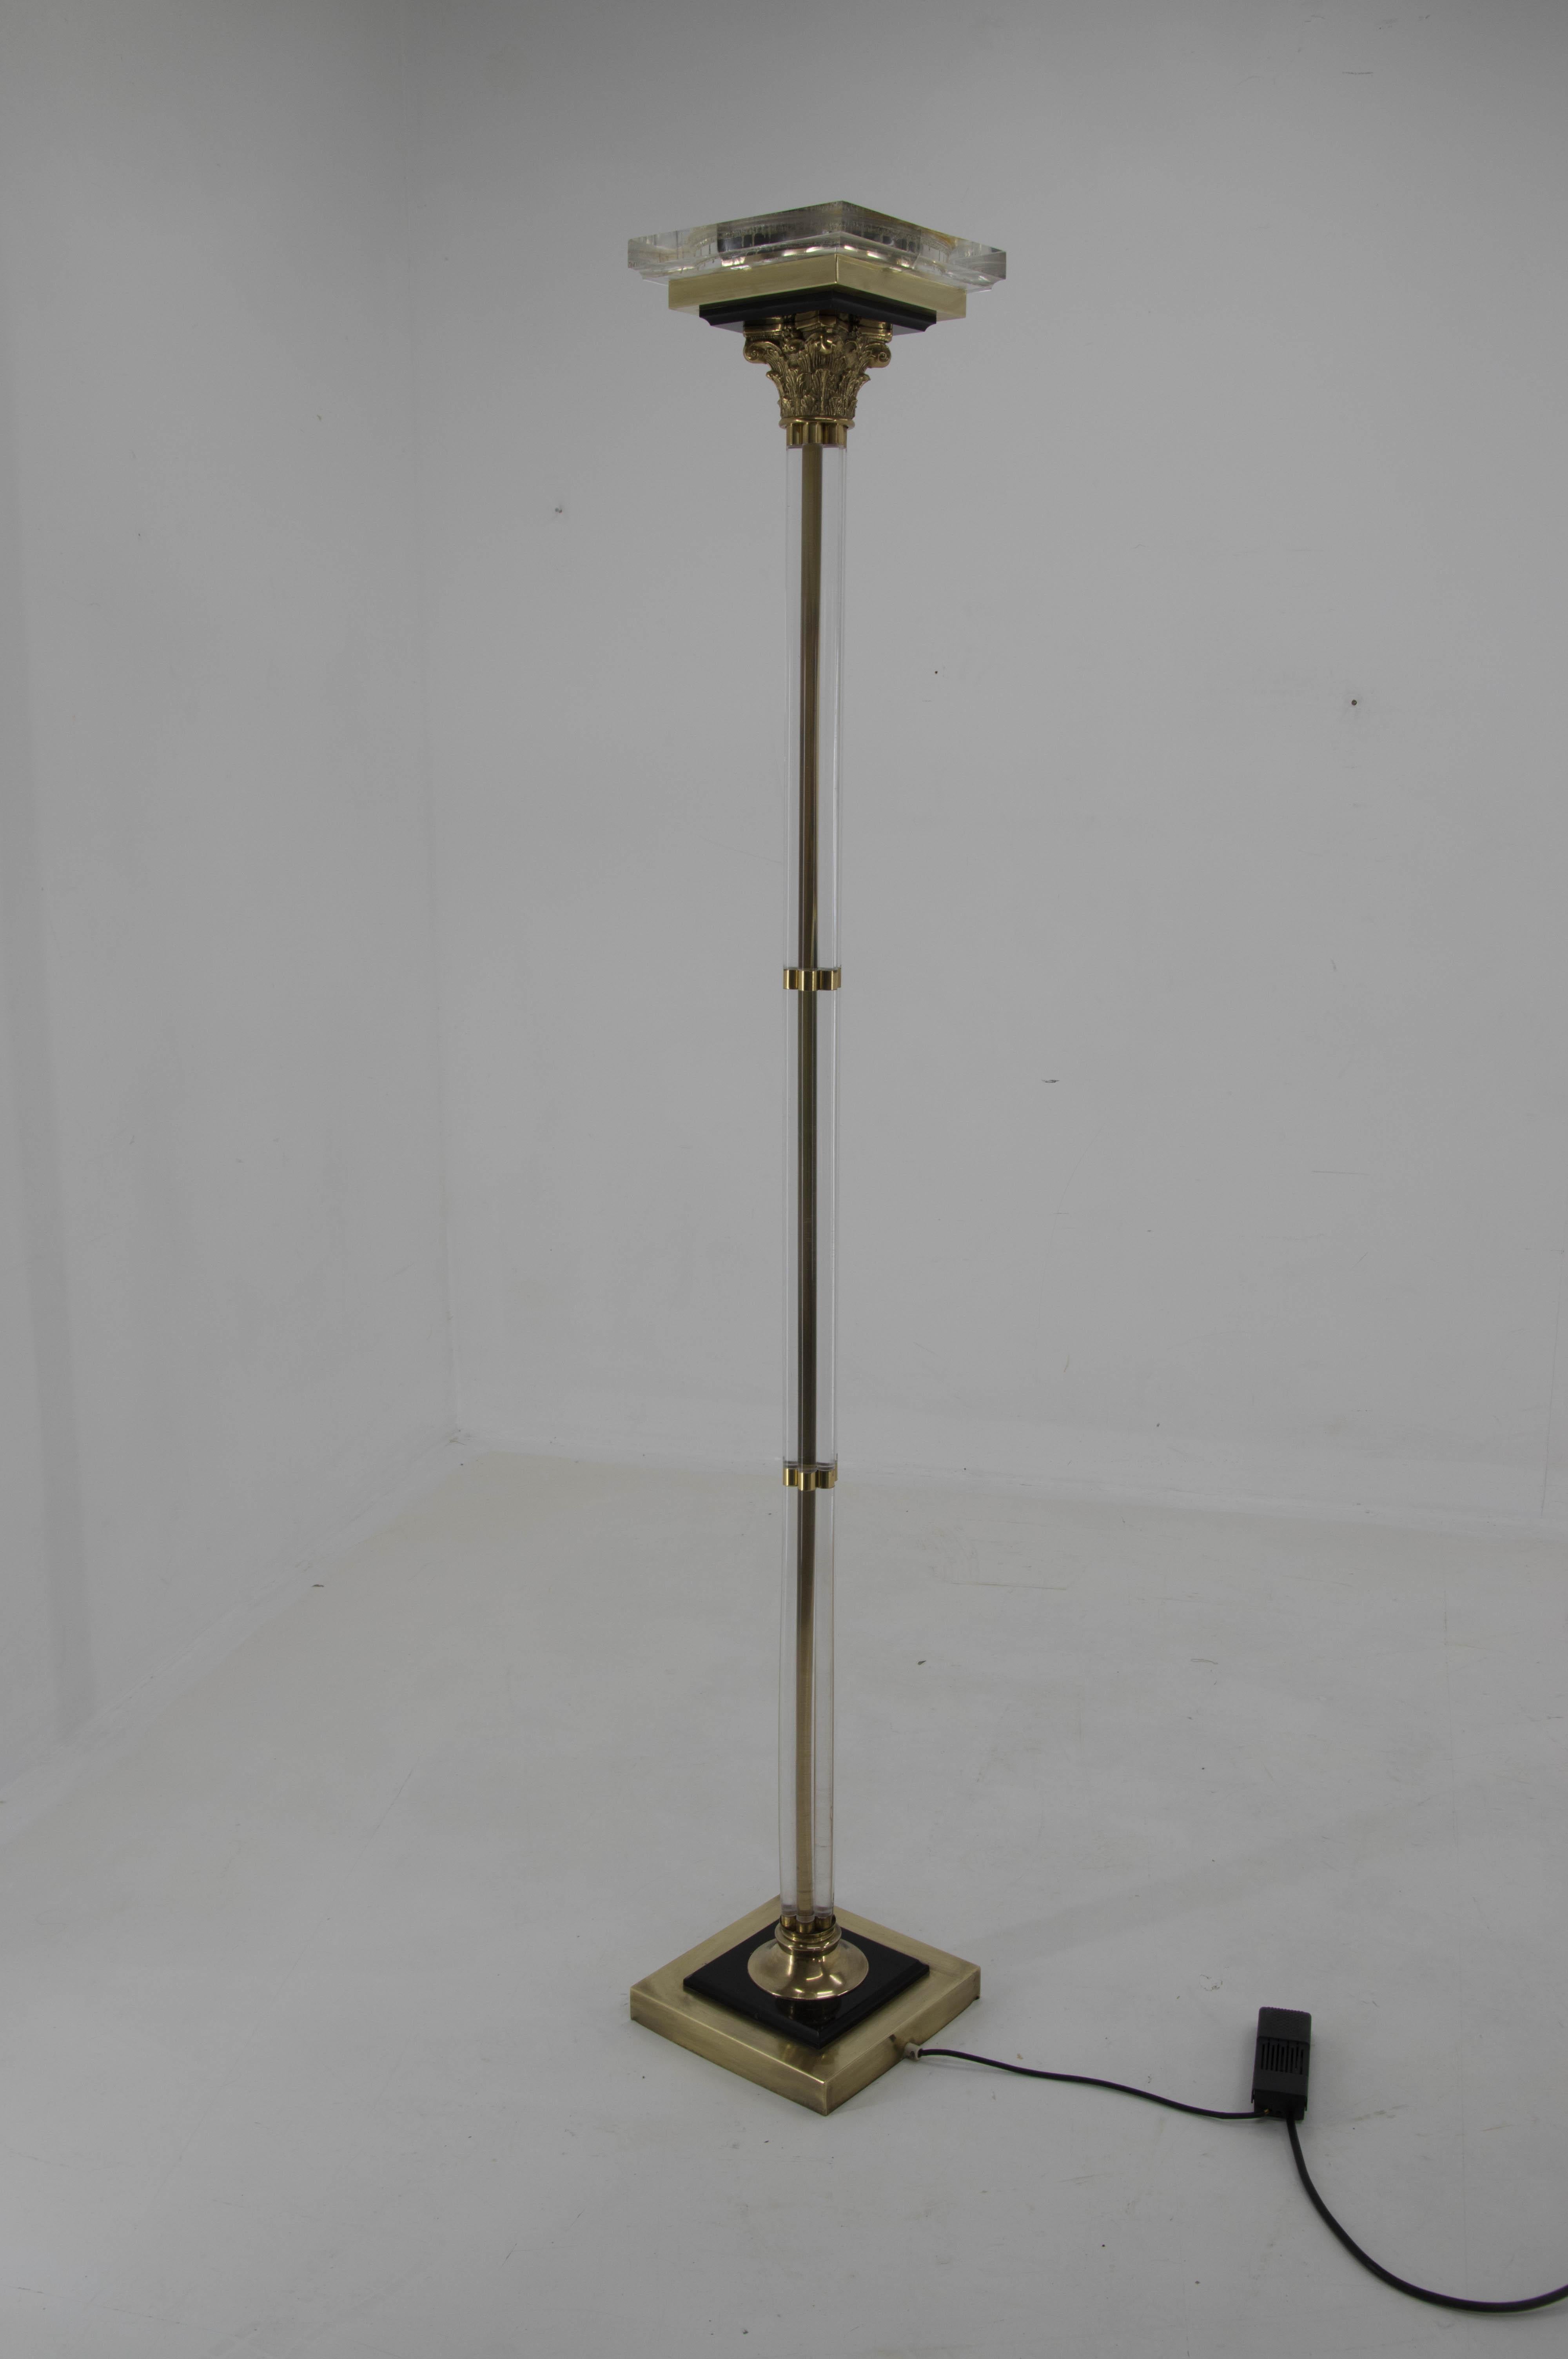 Torch uplight floor lamp in a shape of an Antic column.
Made in Italy in 1970s or 1980s
Made of brass resin and glass.
The light is dimmable including foot switch.
The top transparent resin plate has visible cracks in the photo, but they have no